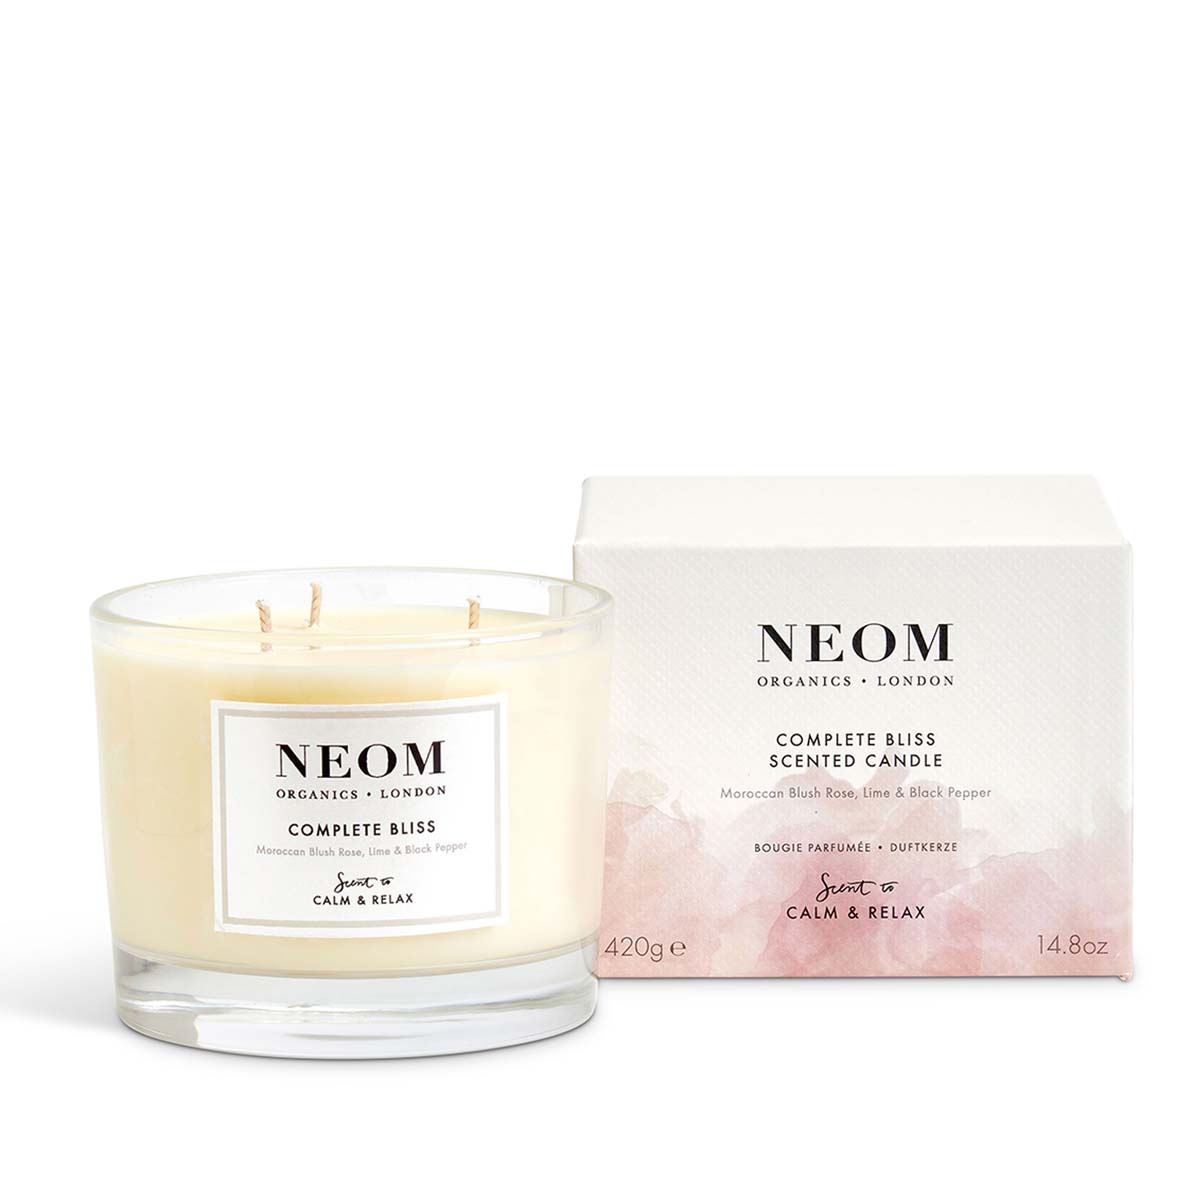 Neom Complete Bliss Scented Candle (3 Wicks) 420G